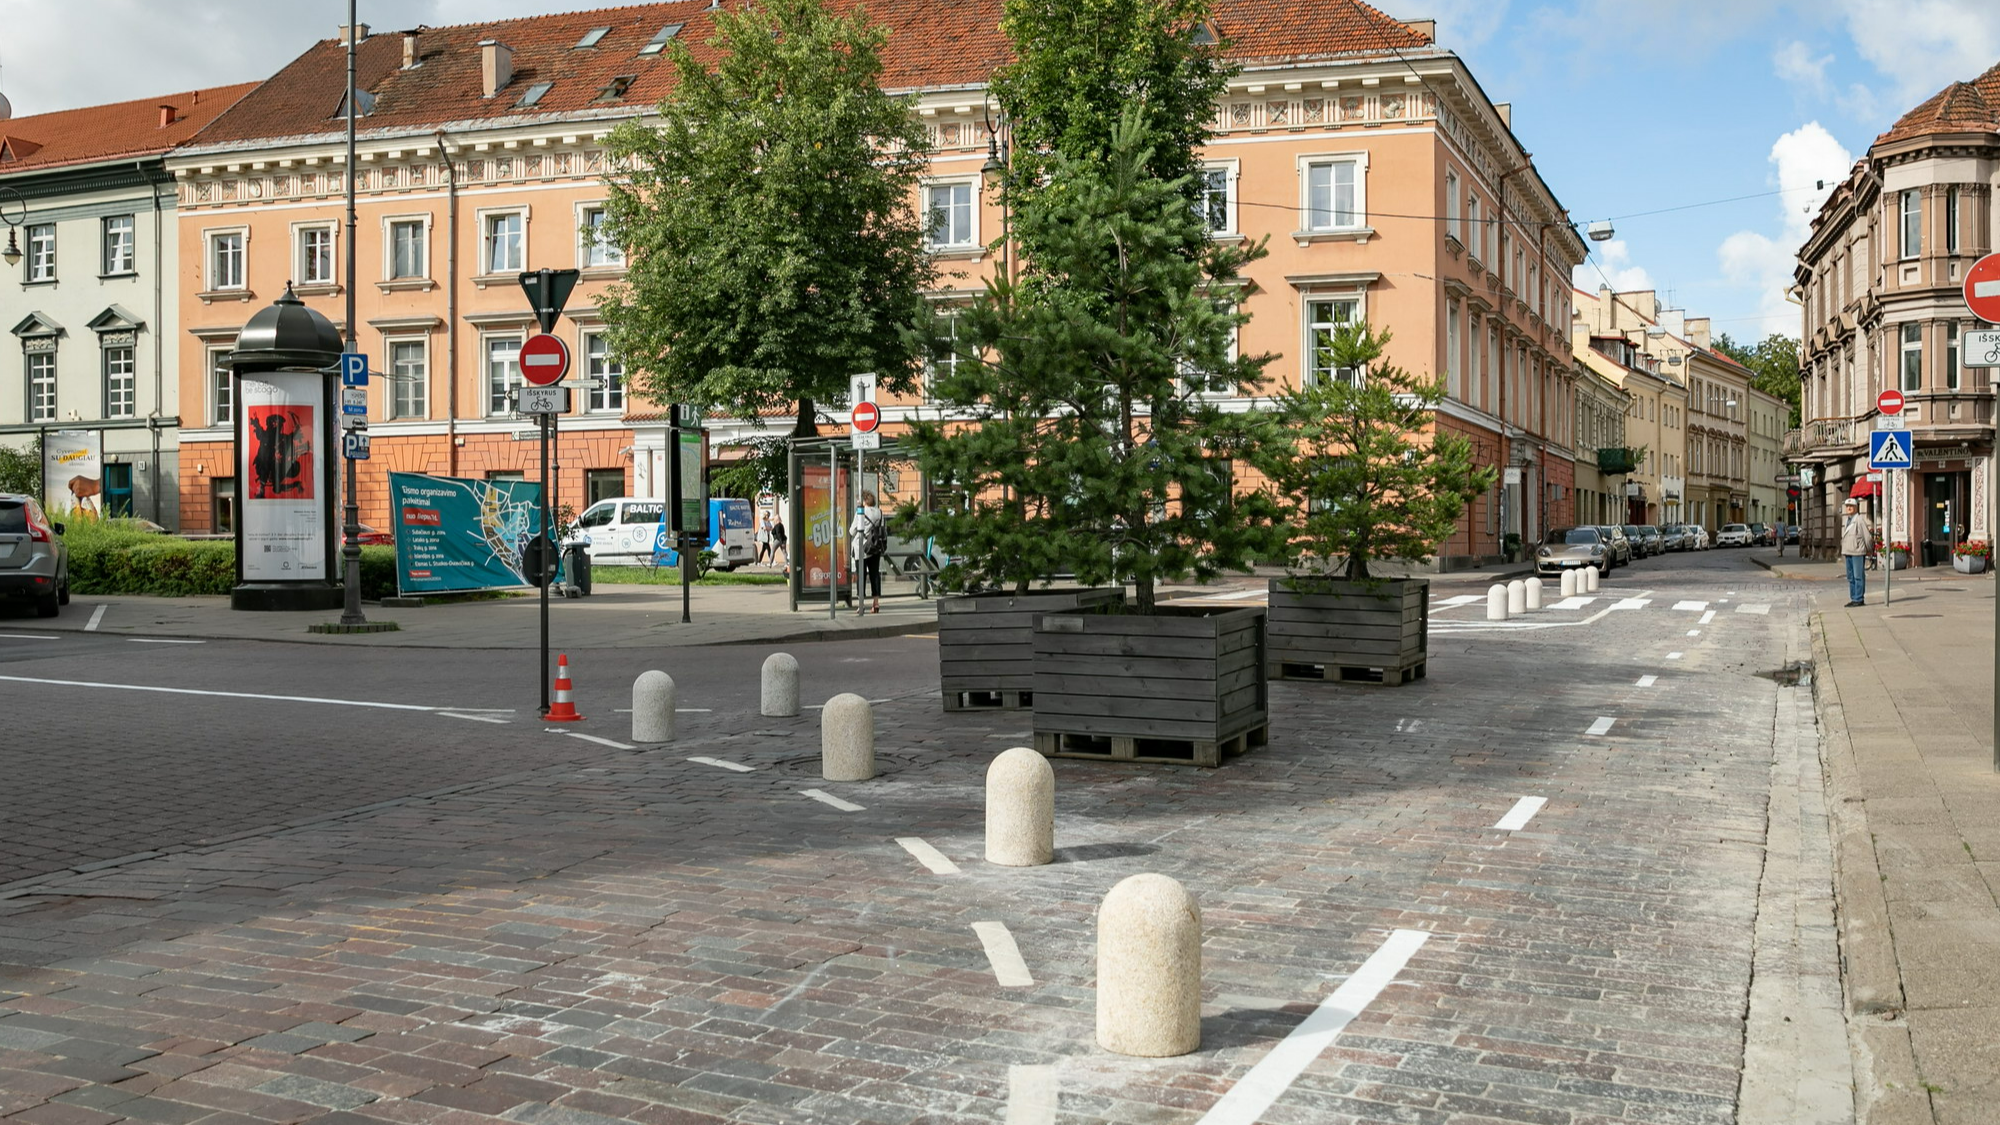 A street view with traffic reduction and diversion elements - such as large tree boxes, signage and bicycle roads.